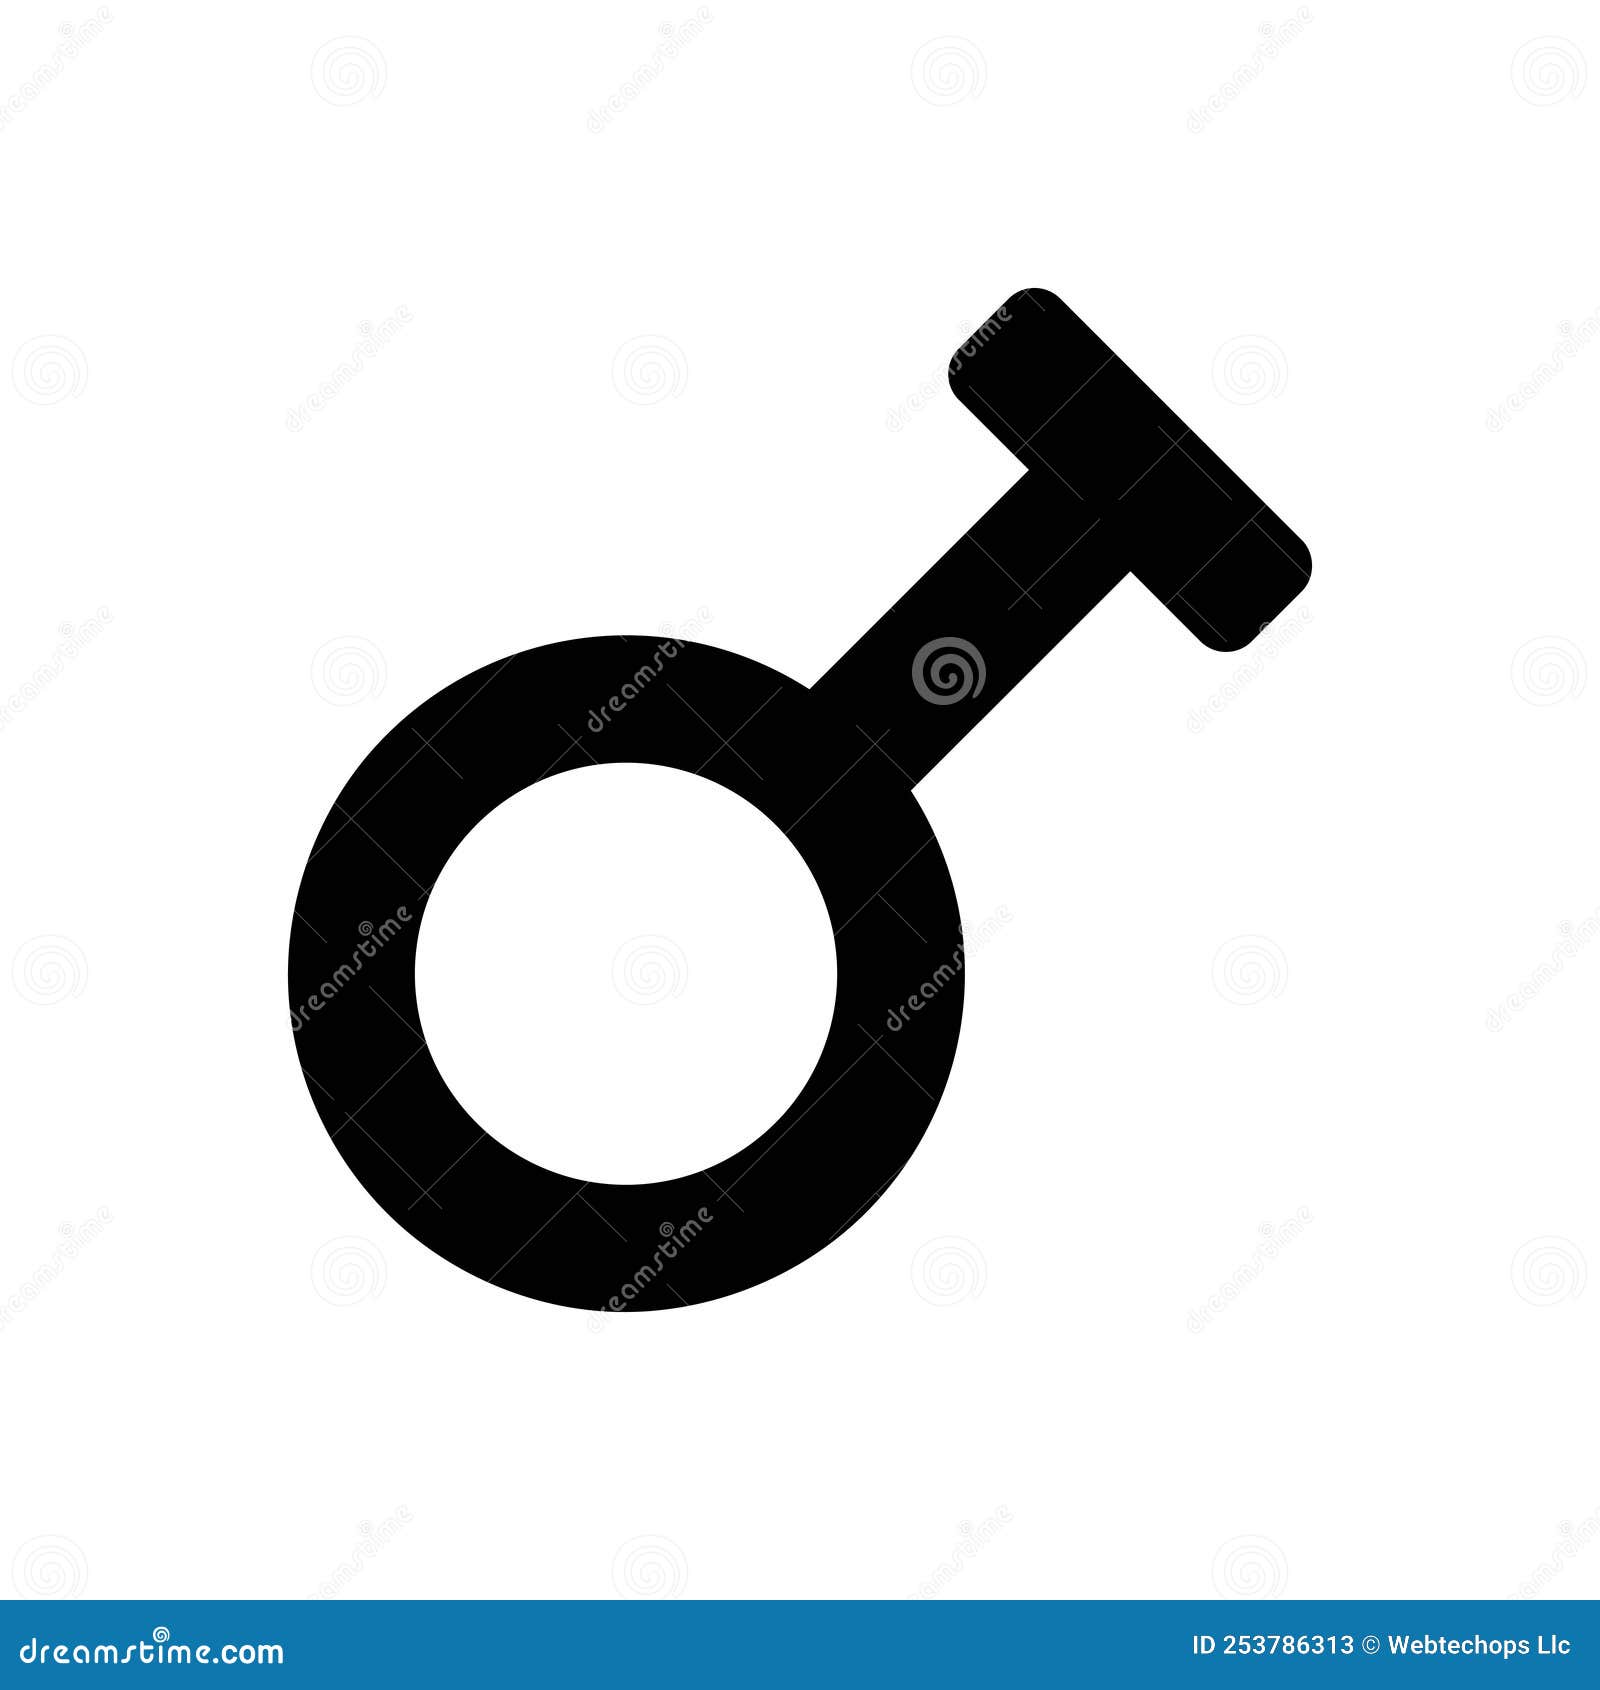 black solid icon for travesti, gender and sexual